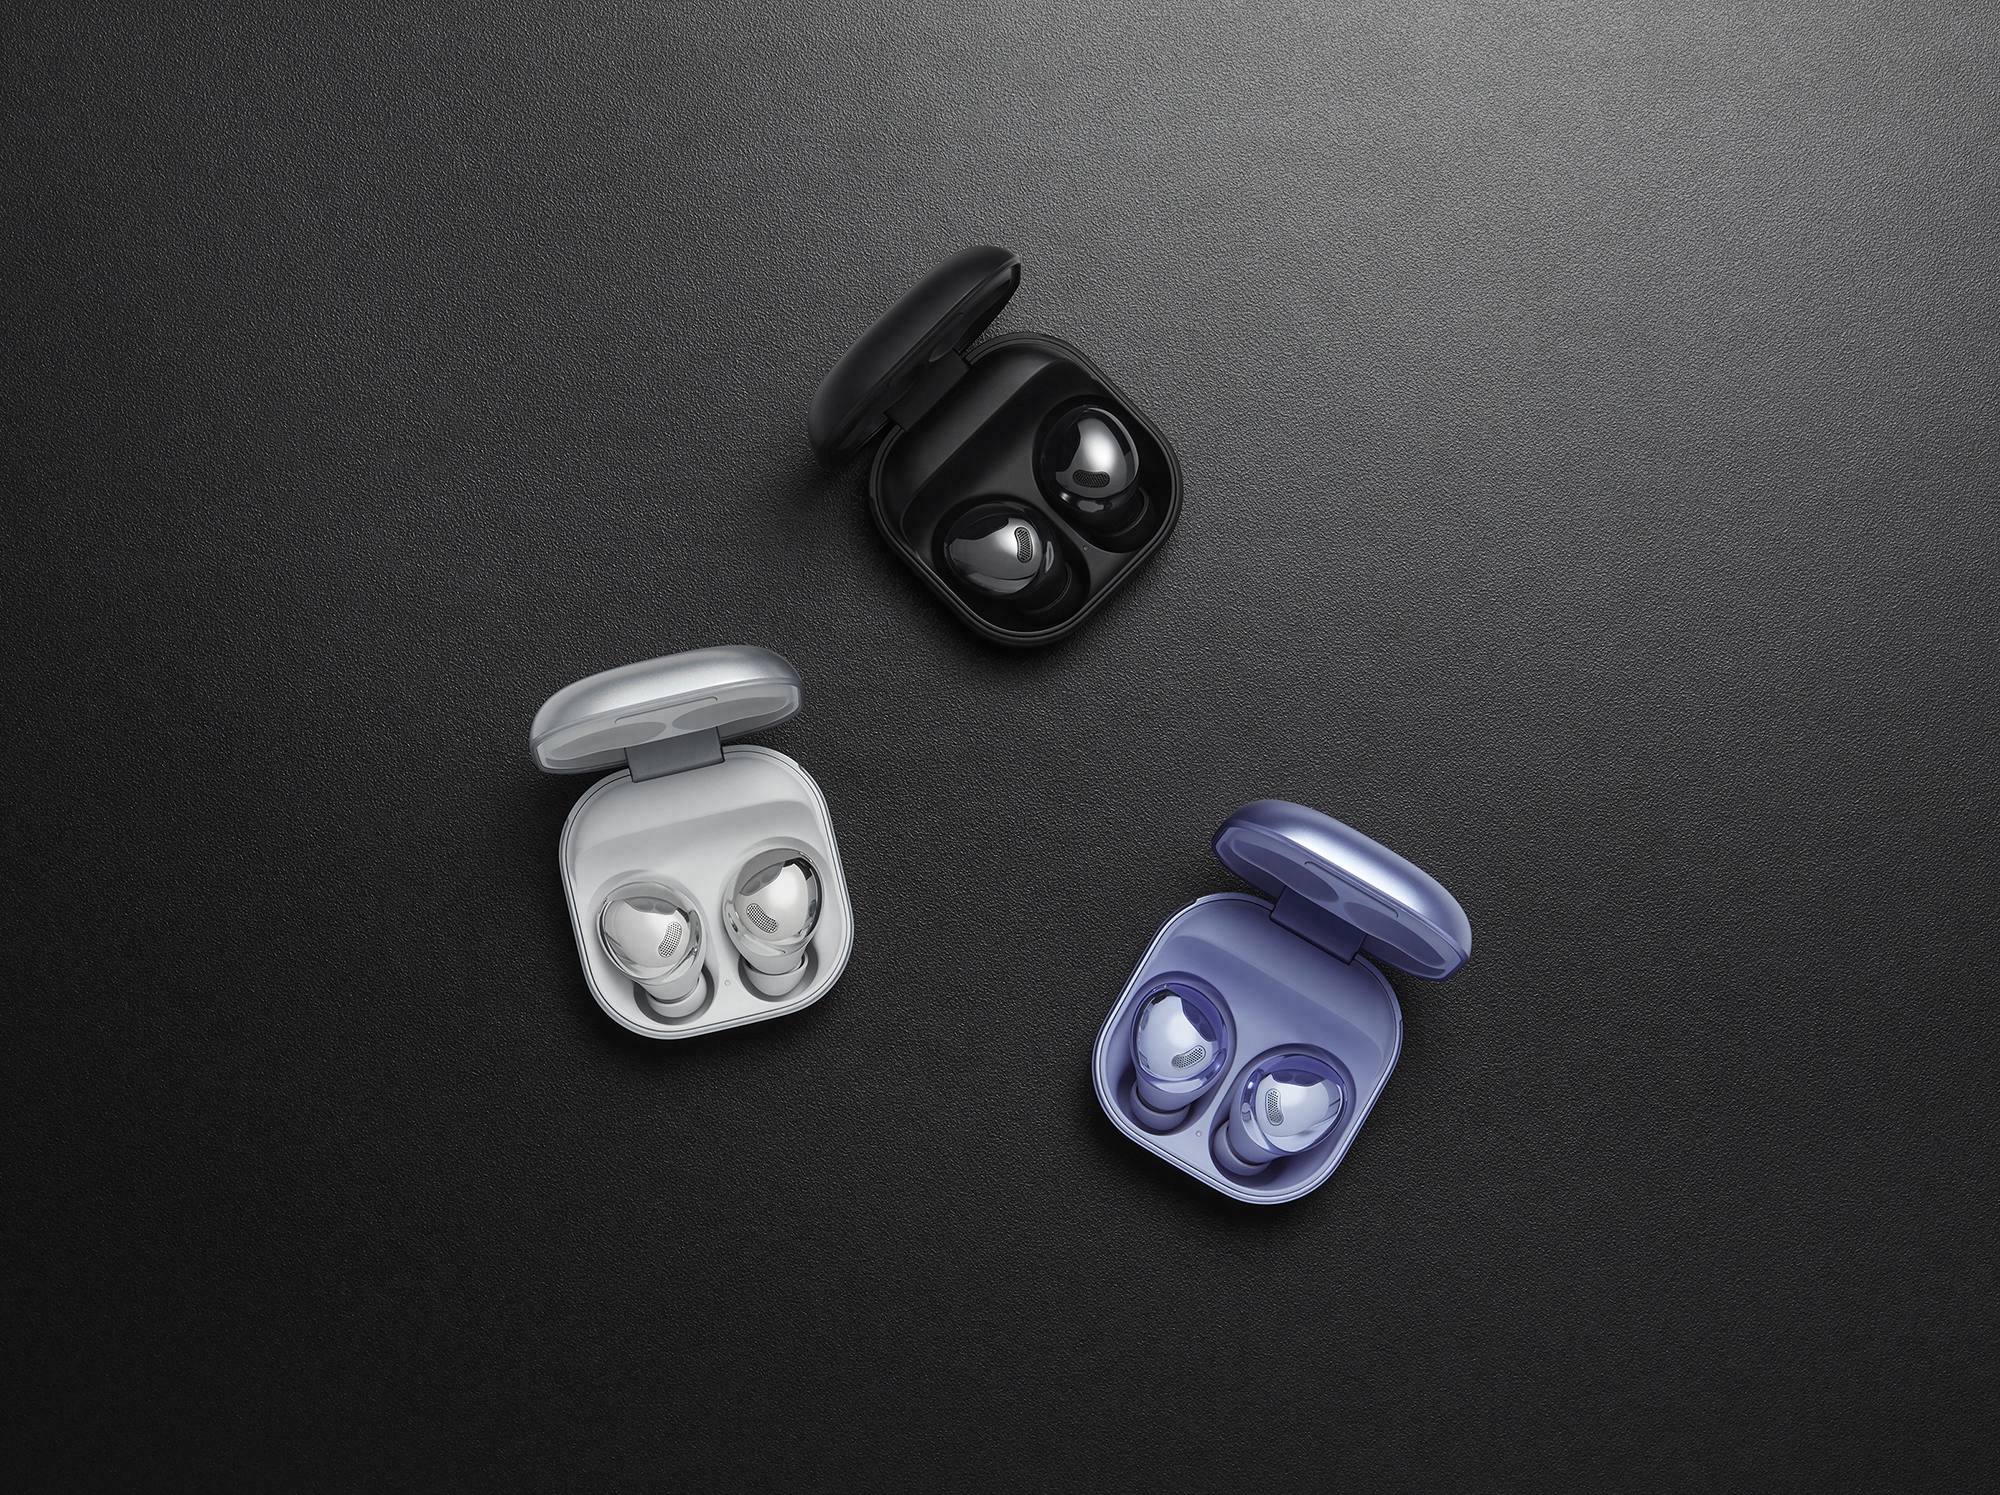 Samsung Galaxy Buds Pro with the update got some features of Galaxy Buds 2